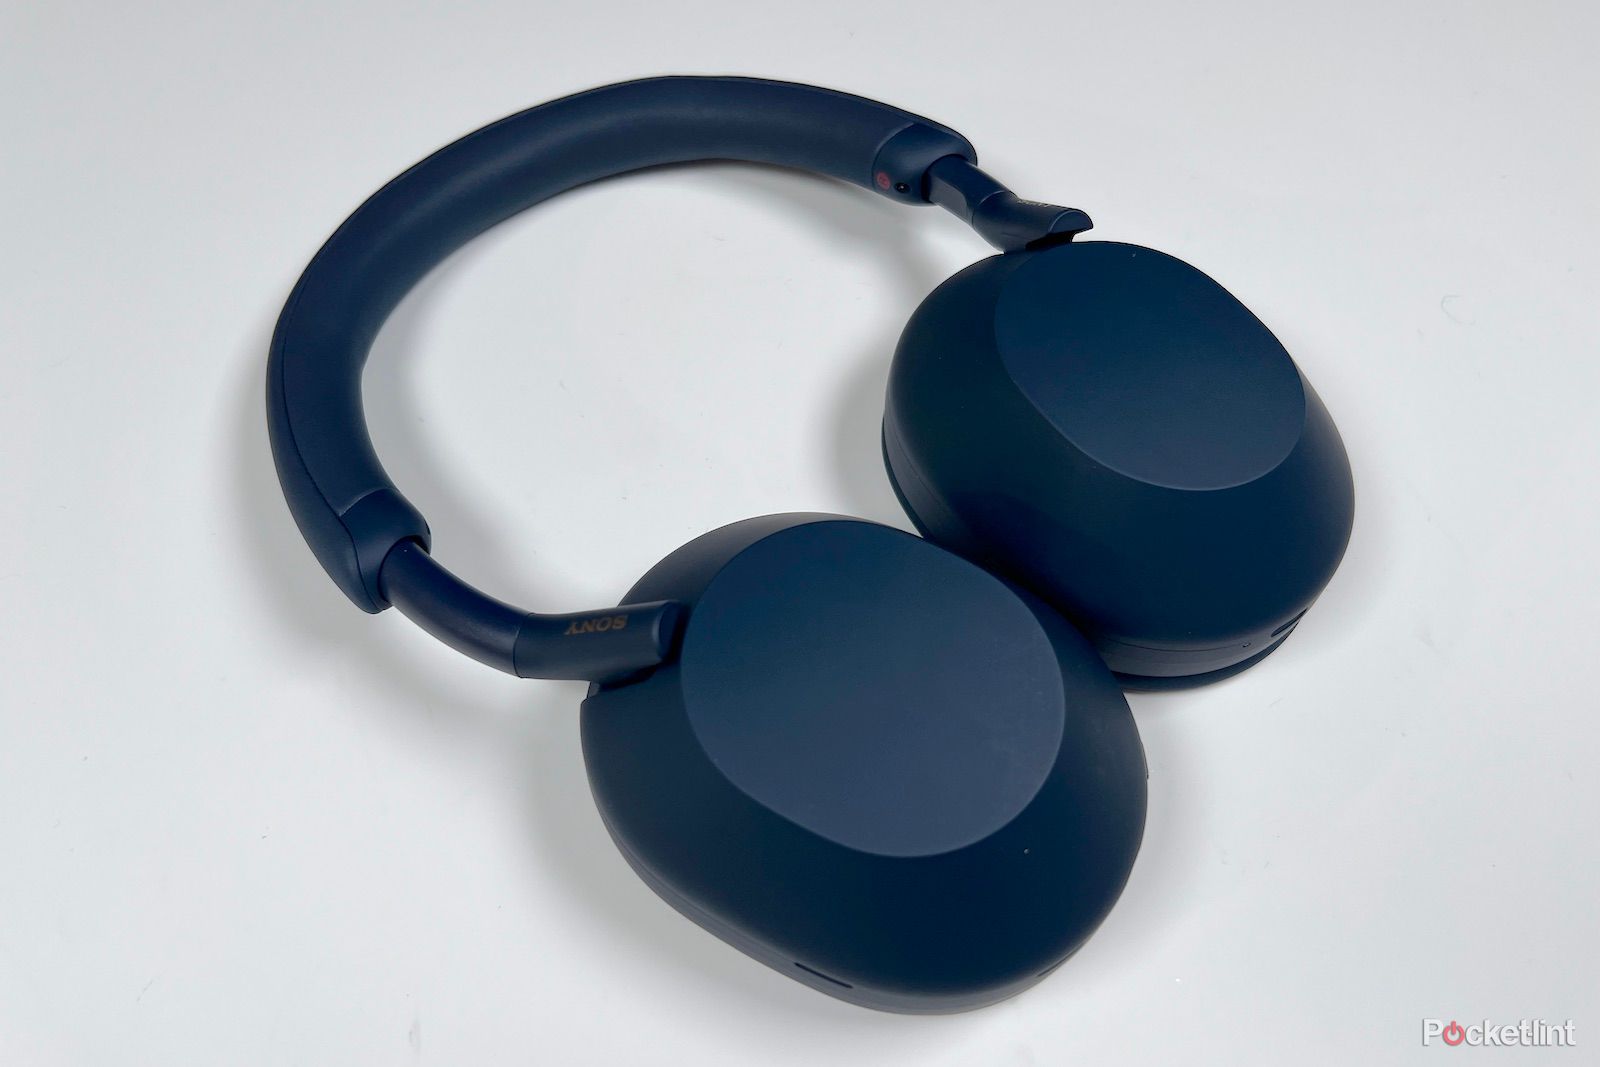 Sony’s WH-1000XM5 are now available in Midnight Blue, and they look incredible